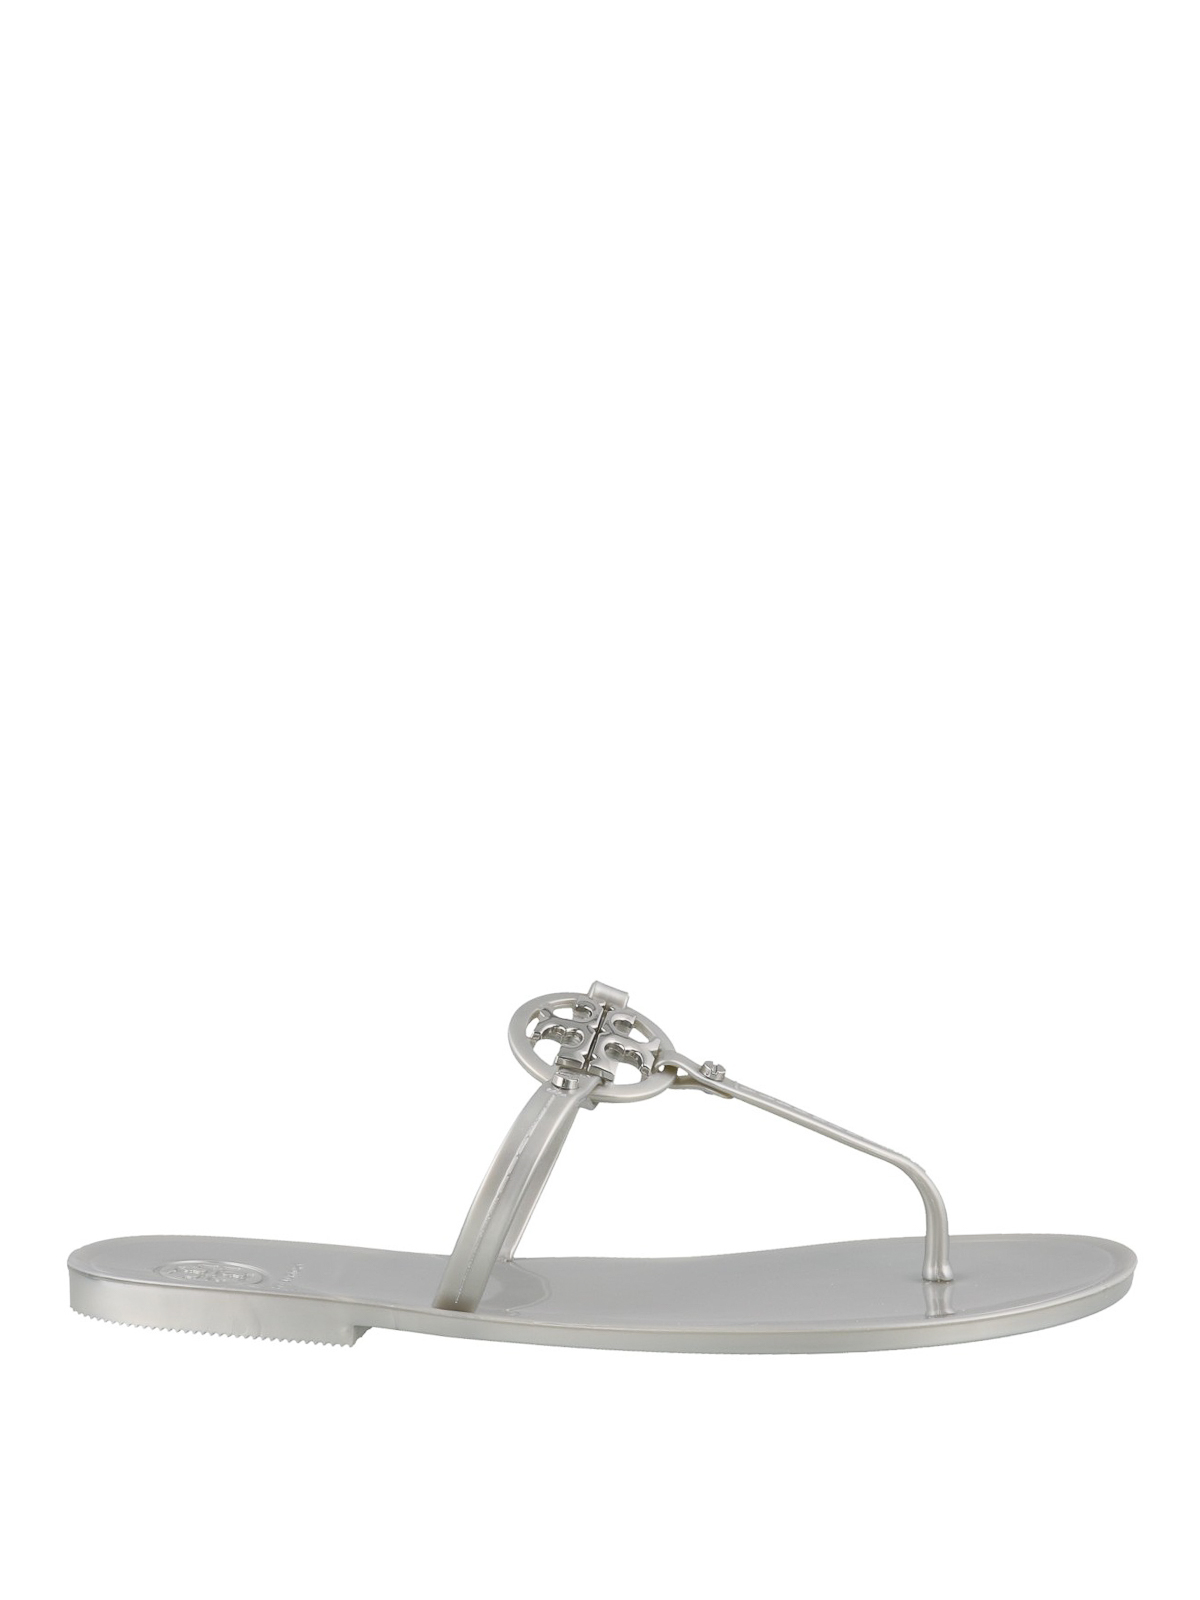 TORY BURCH MINI MILLER JELLY THONG SANDALS